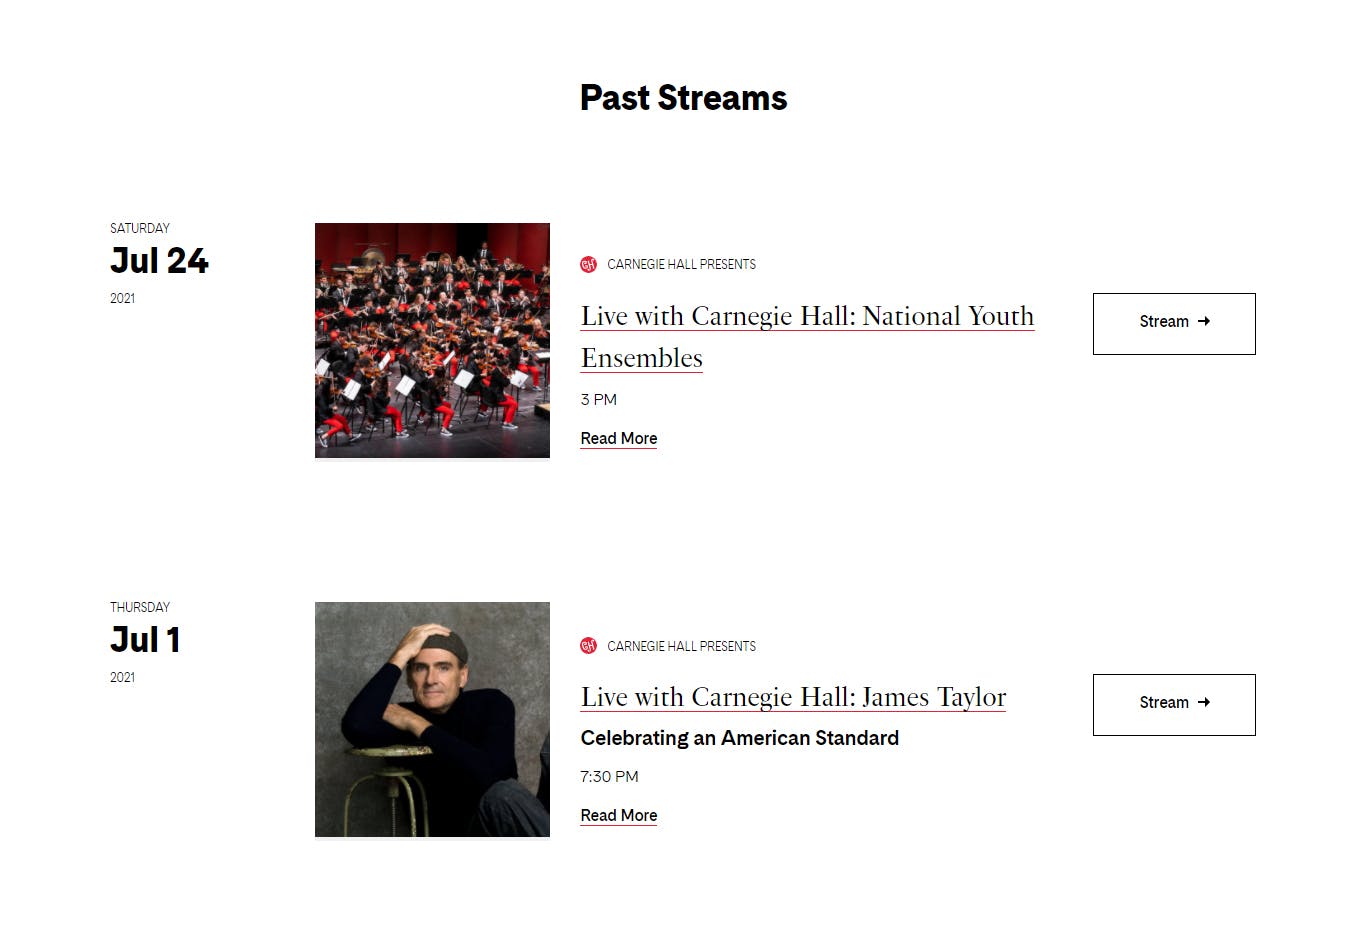 How to Watch Video on Demand Carnegie Hall